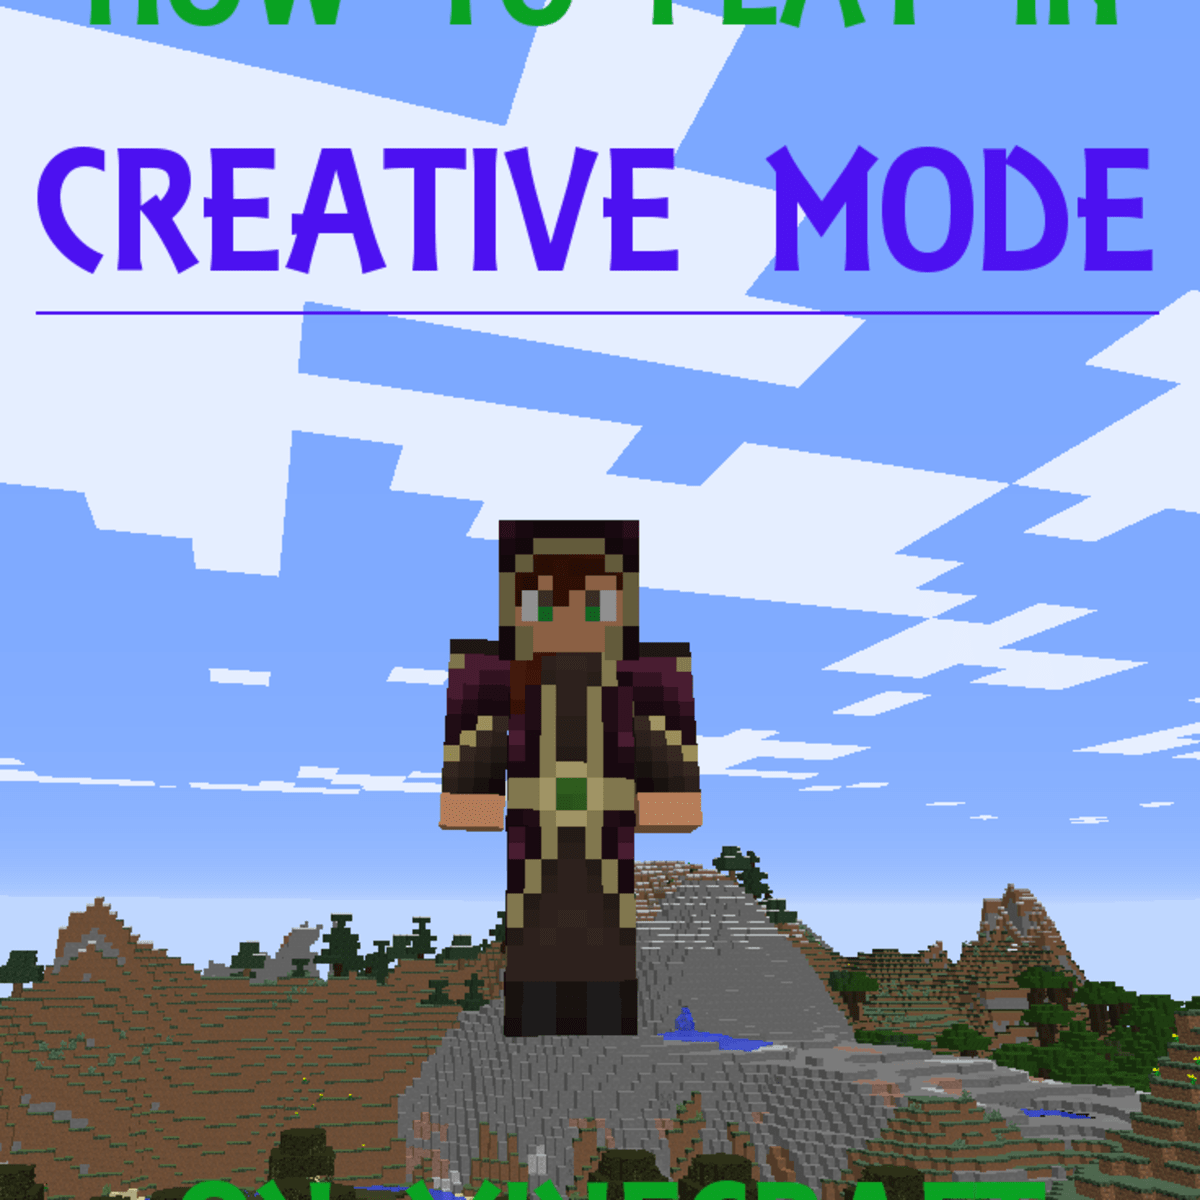 How To Play In Creative Mode On Minecraft Levelskip